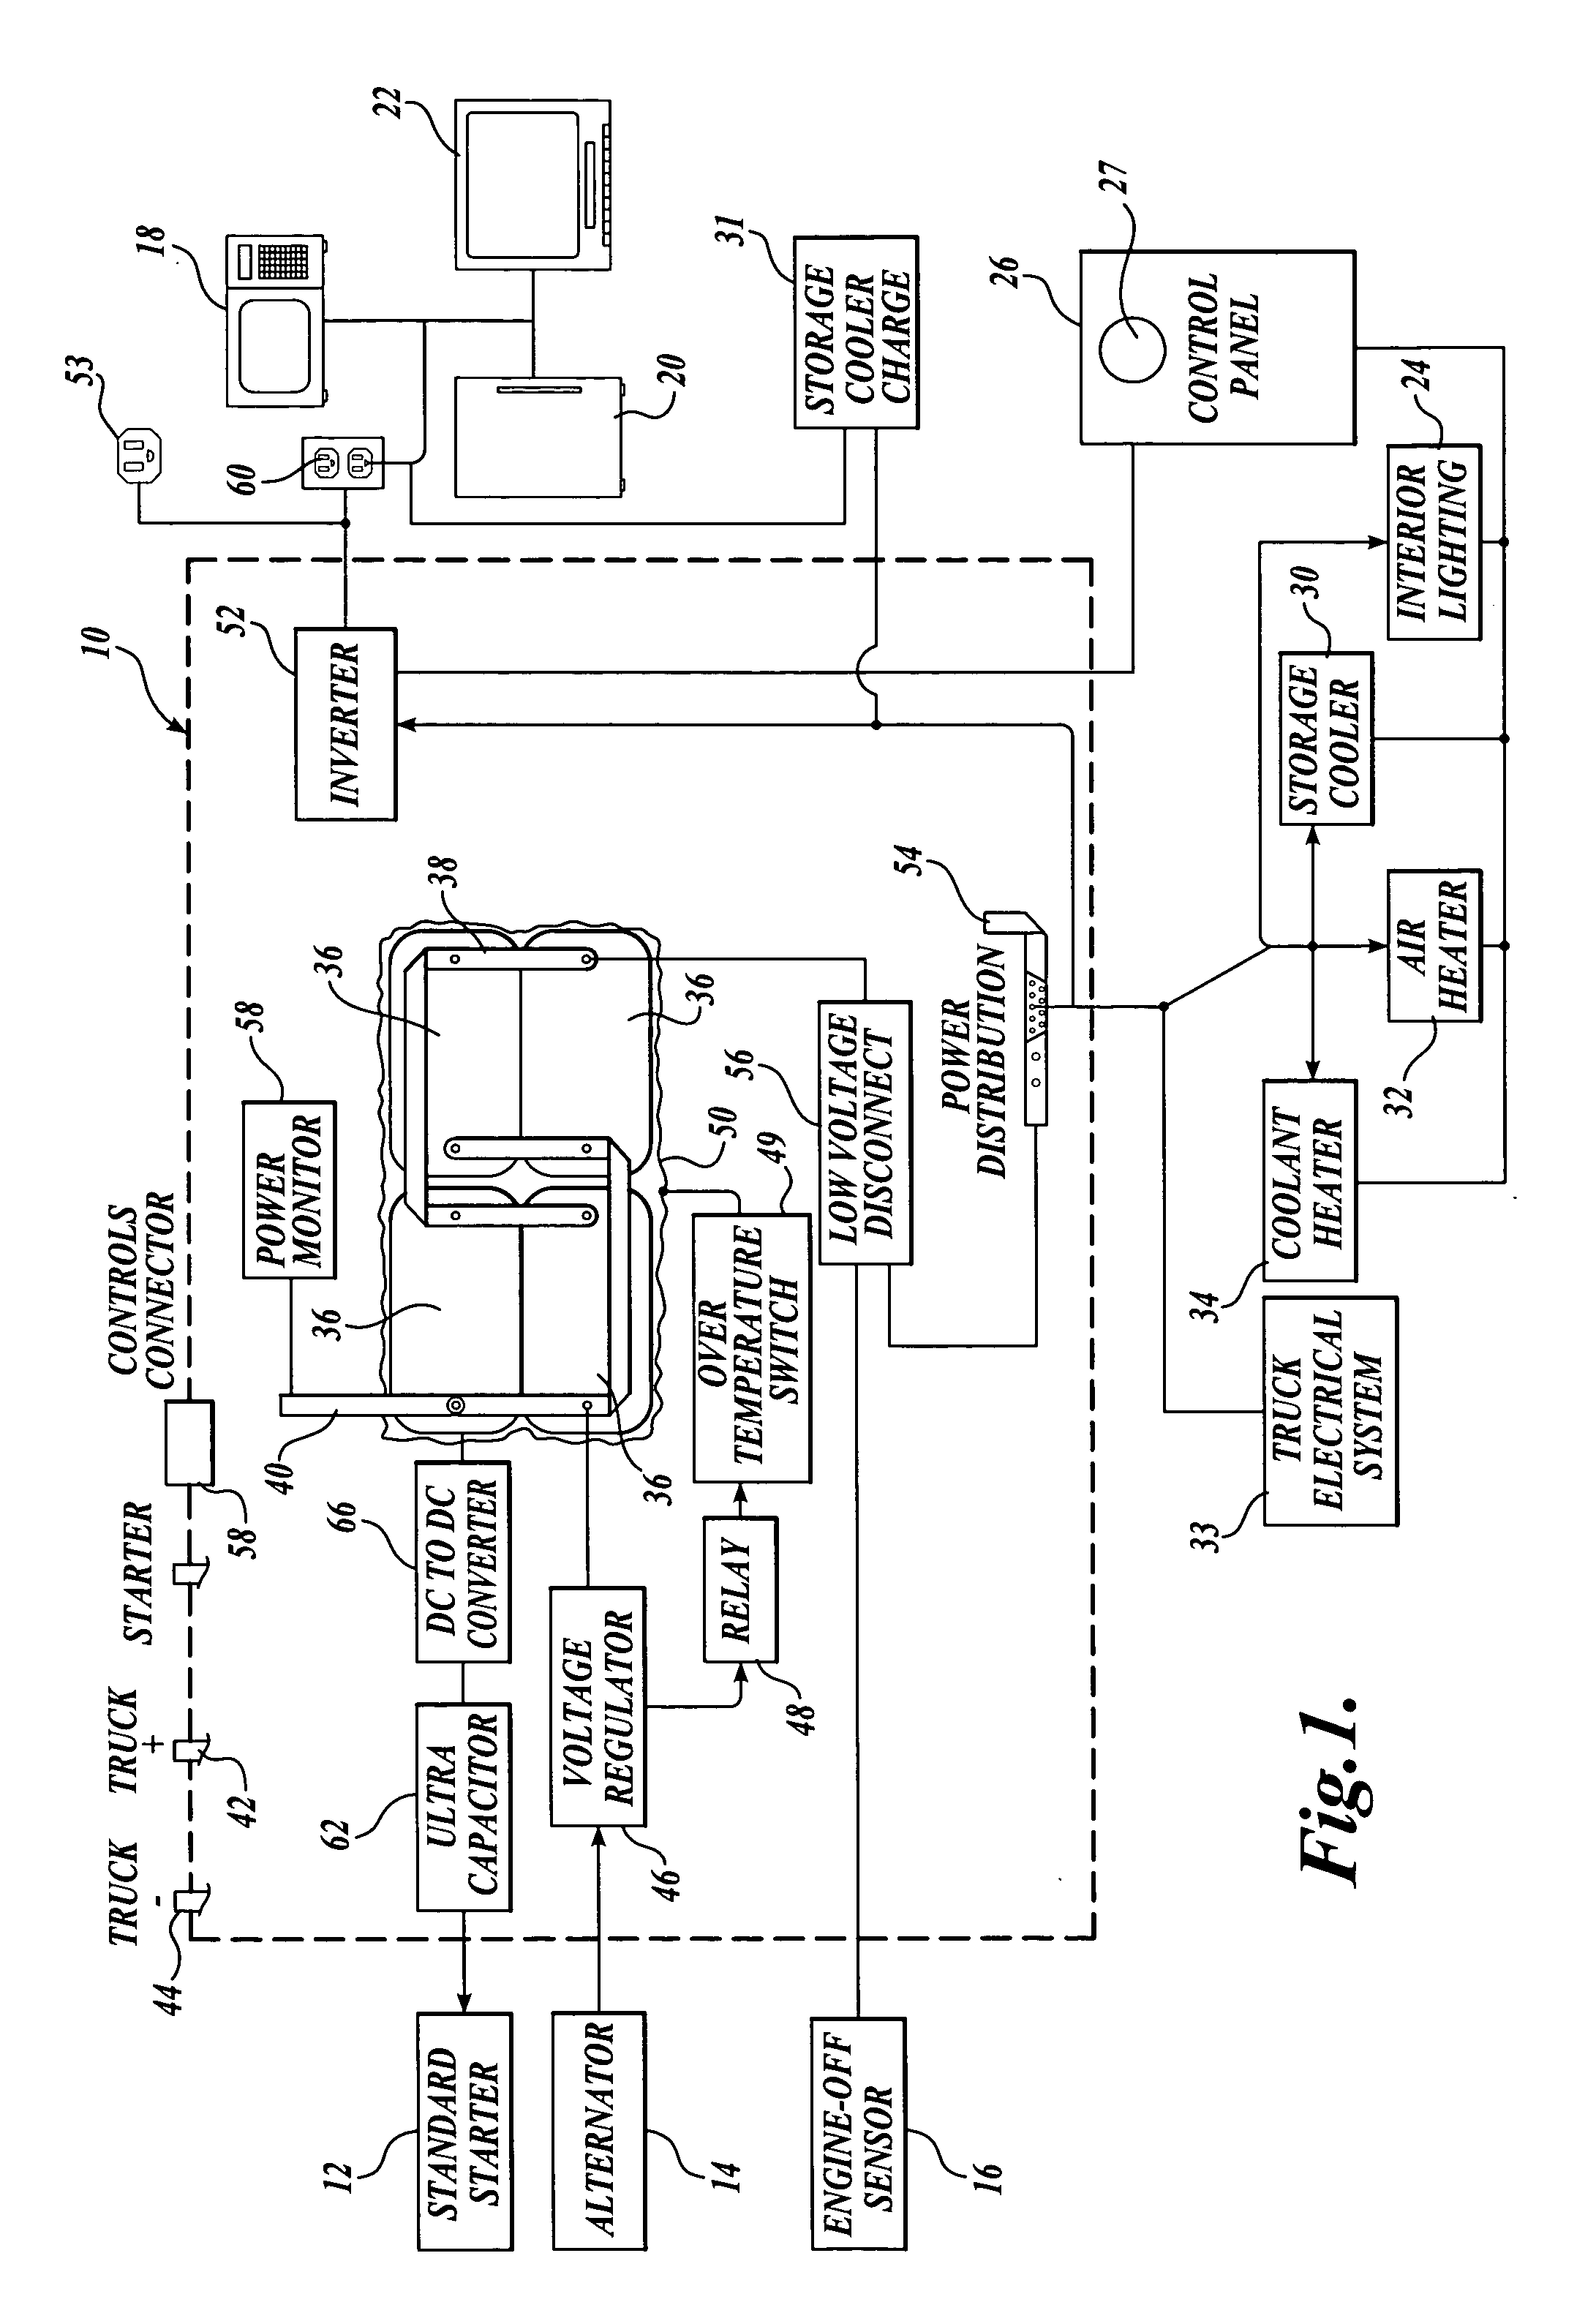 Electrical power system for vehicles requiring electrical power while the vehicle engine is not in operation